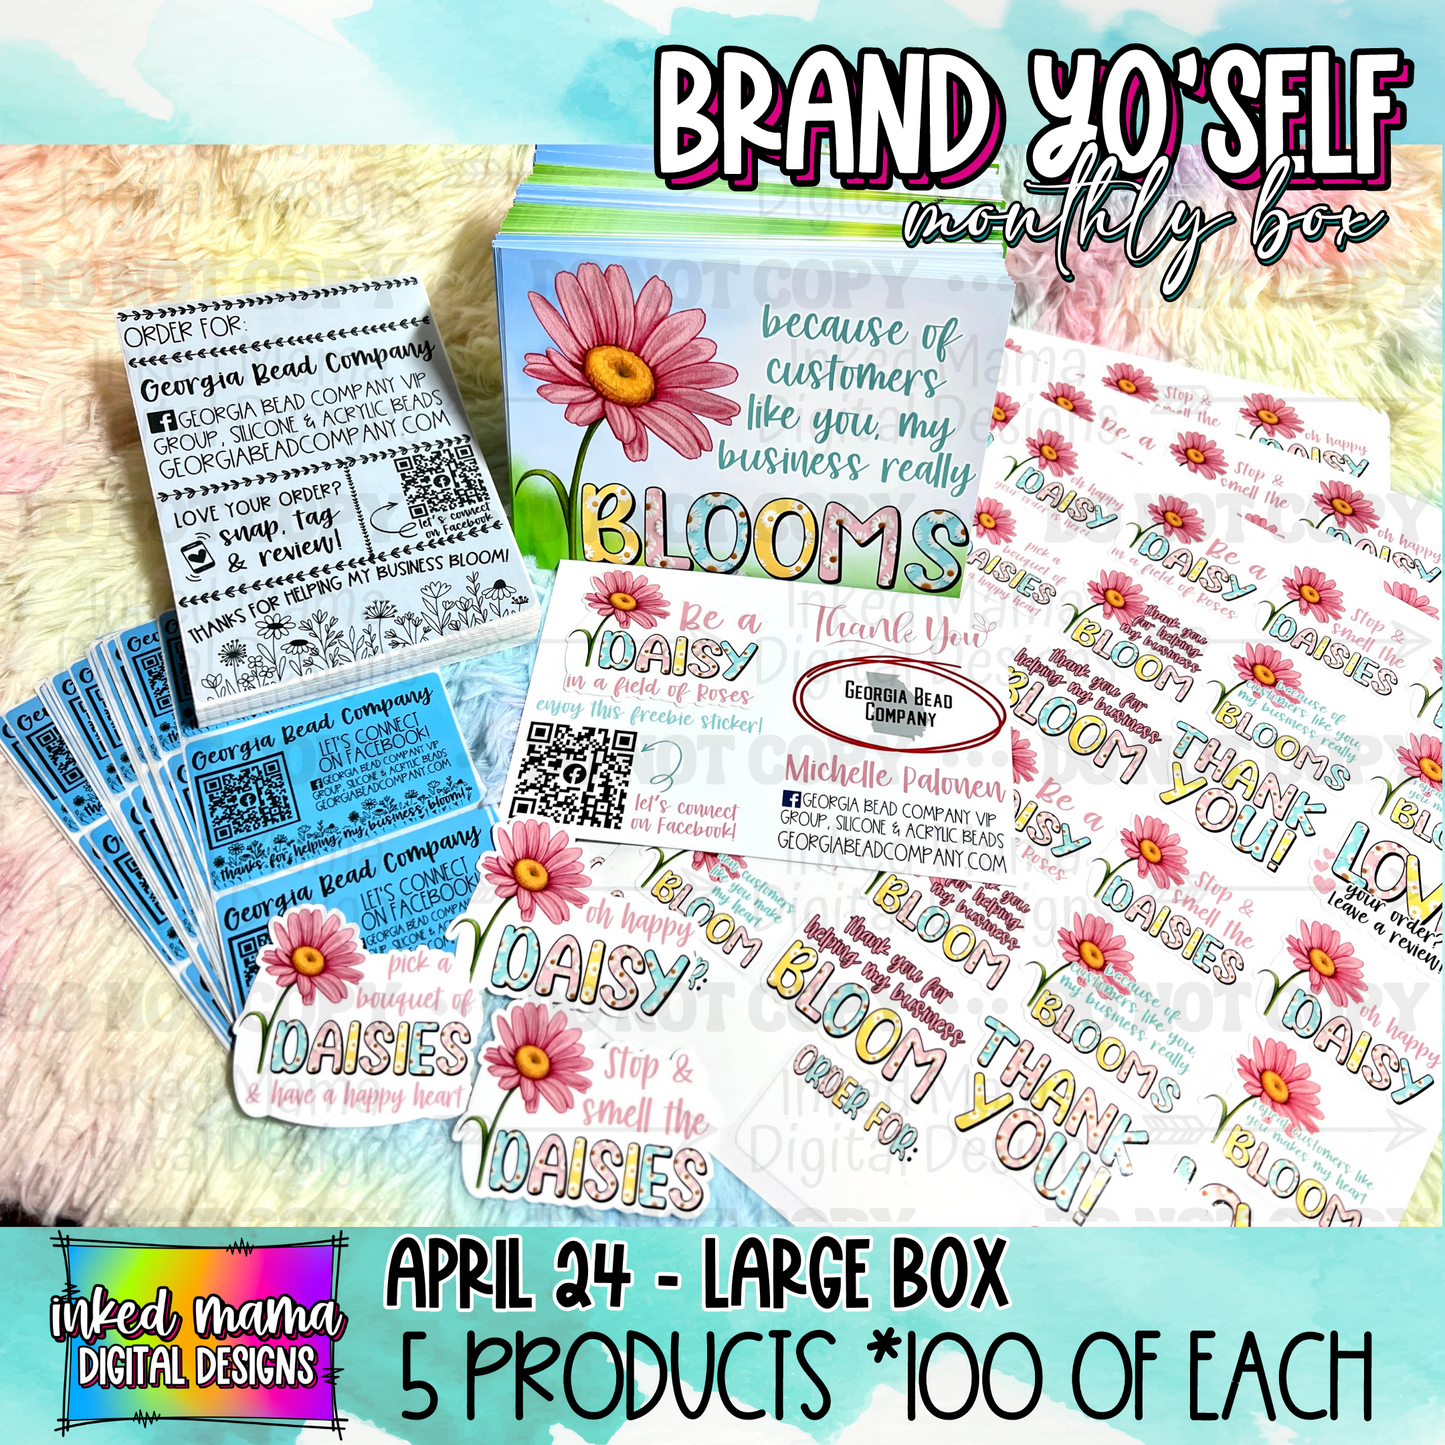 Brand Yo’self Monthly Box | Closes May 15th + Ships by May 25th | Small Business Packaging Products